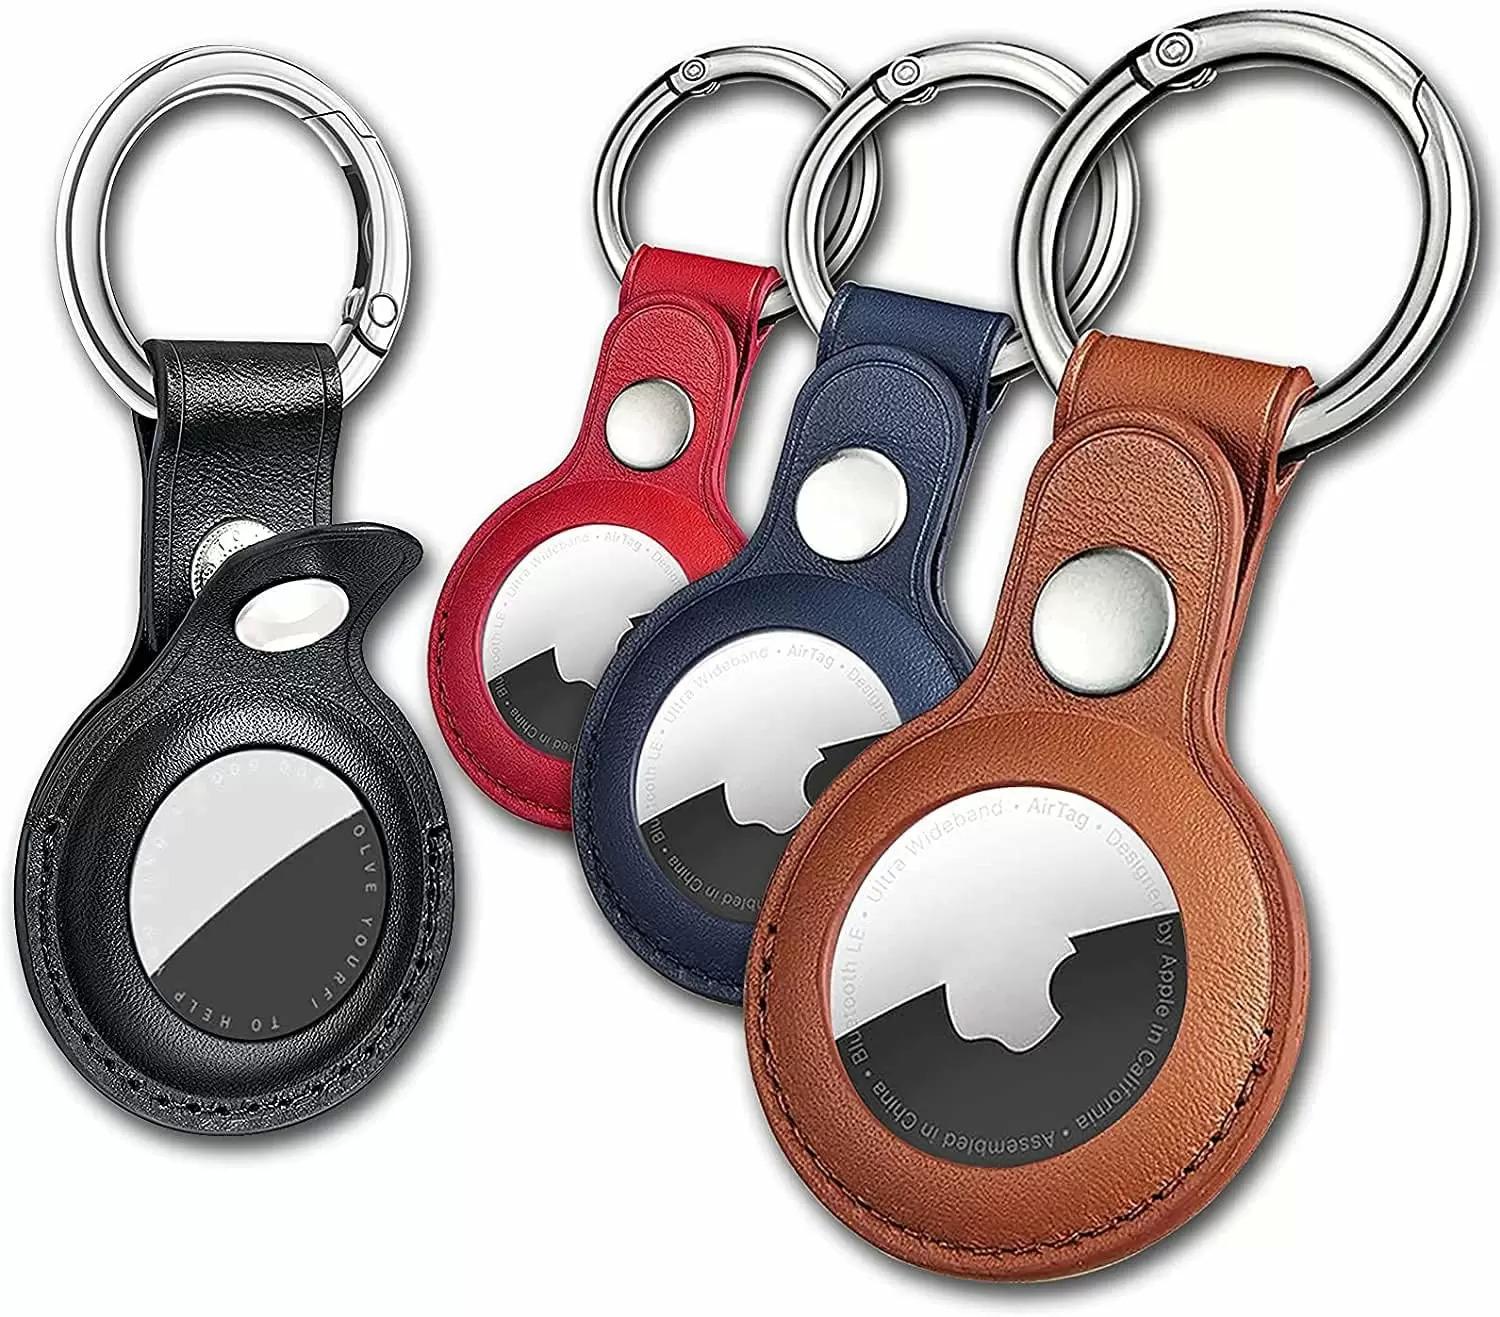 Apple AirTag Leather Key Ring Genuine Brand 2 Pack for $19.99